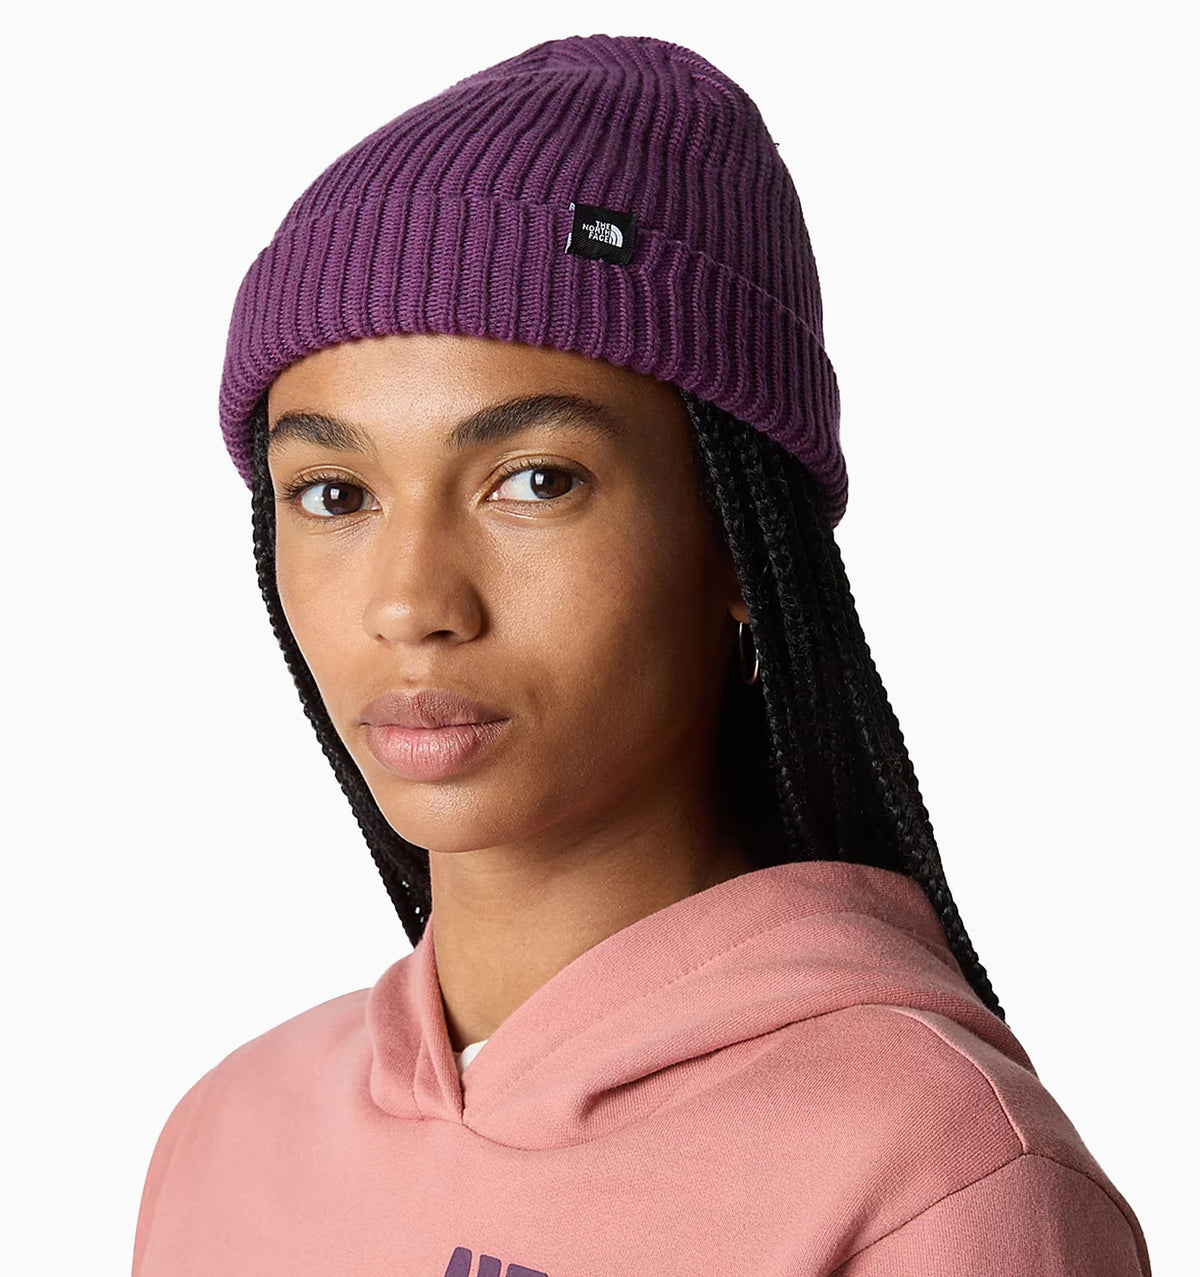 The North Face Fisherman Beanie - Black Currant Purple